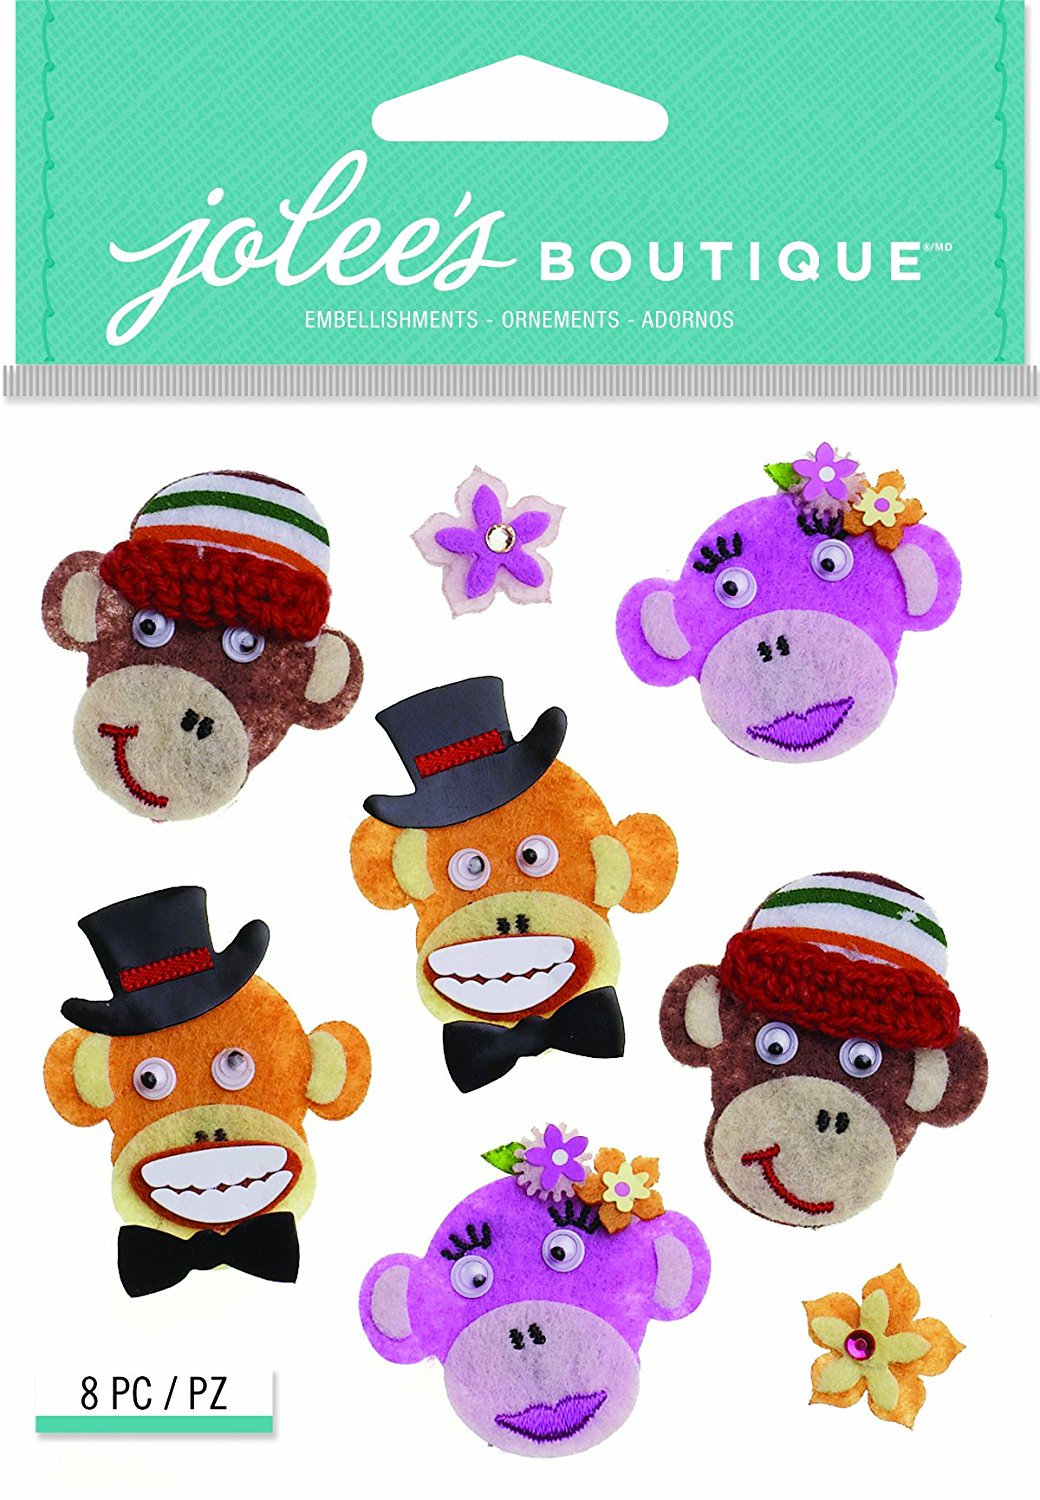 Jolee's Boutique Monkey Repeat Dimensional Stickers